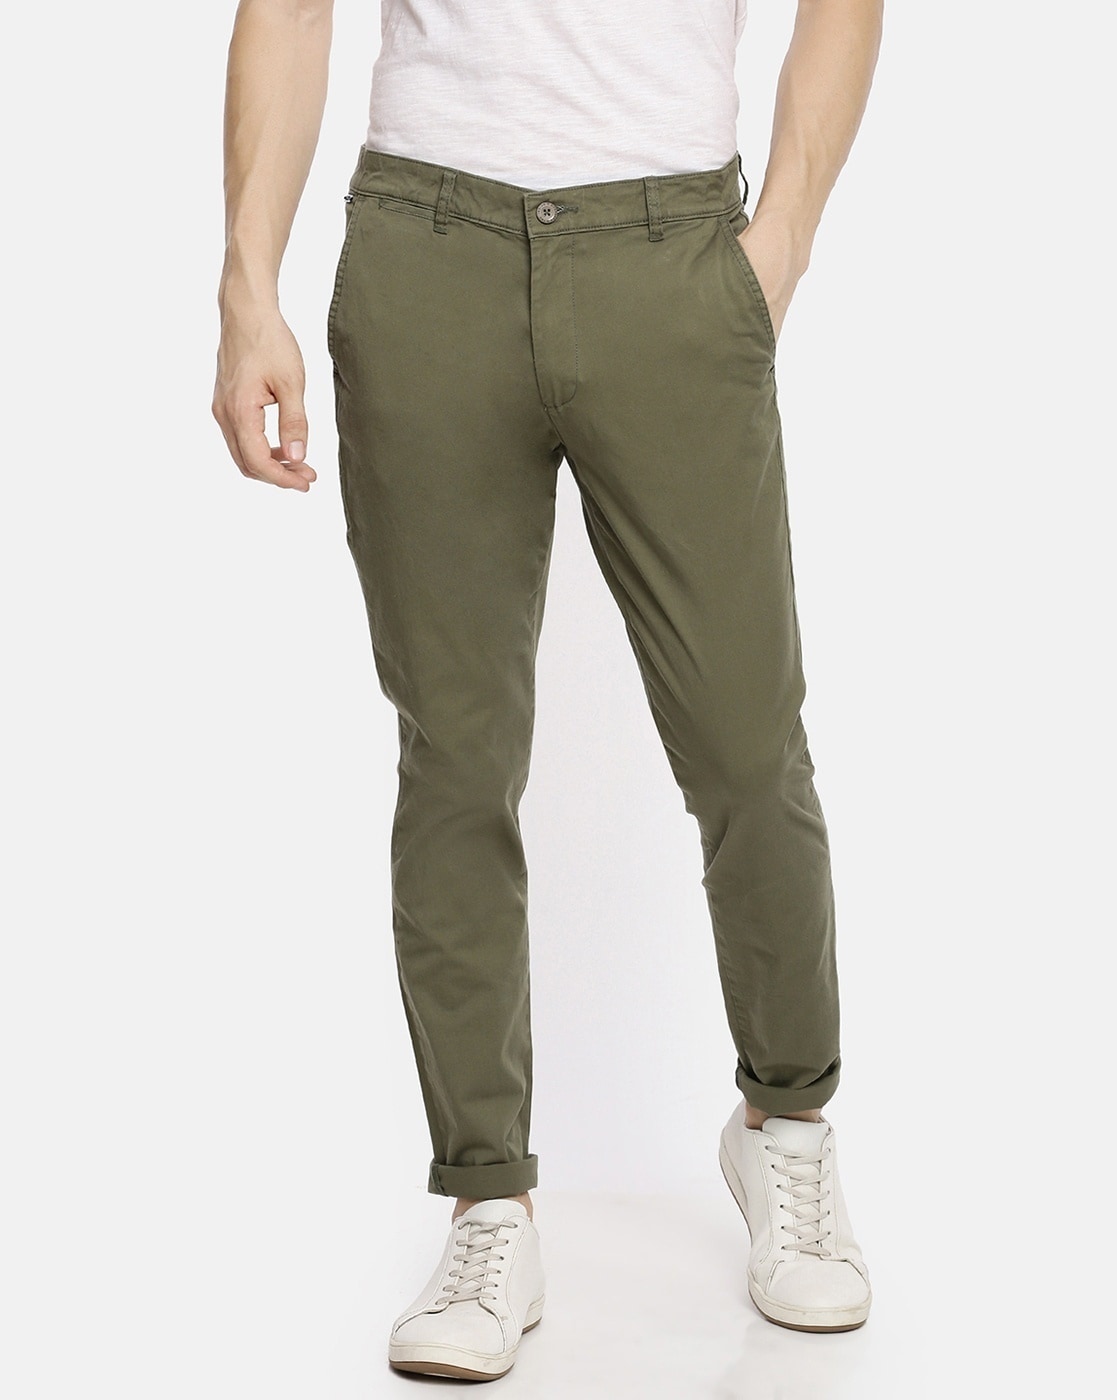 Buy Olive Green Trousers  Pants for Men by The Indian Garage Co Online   Ajiocom